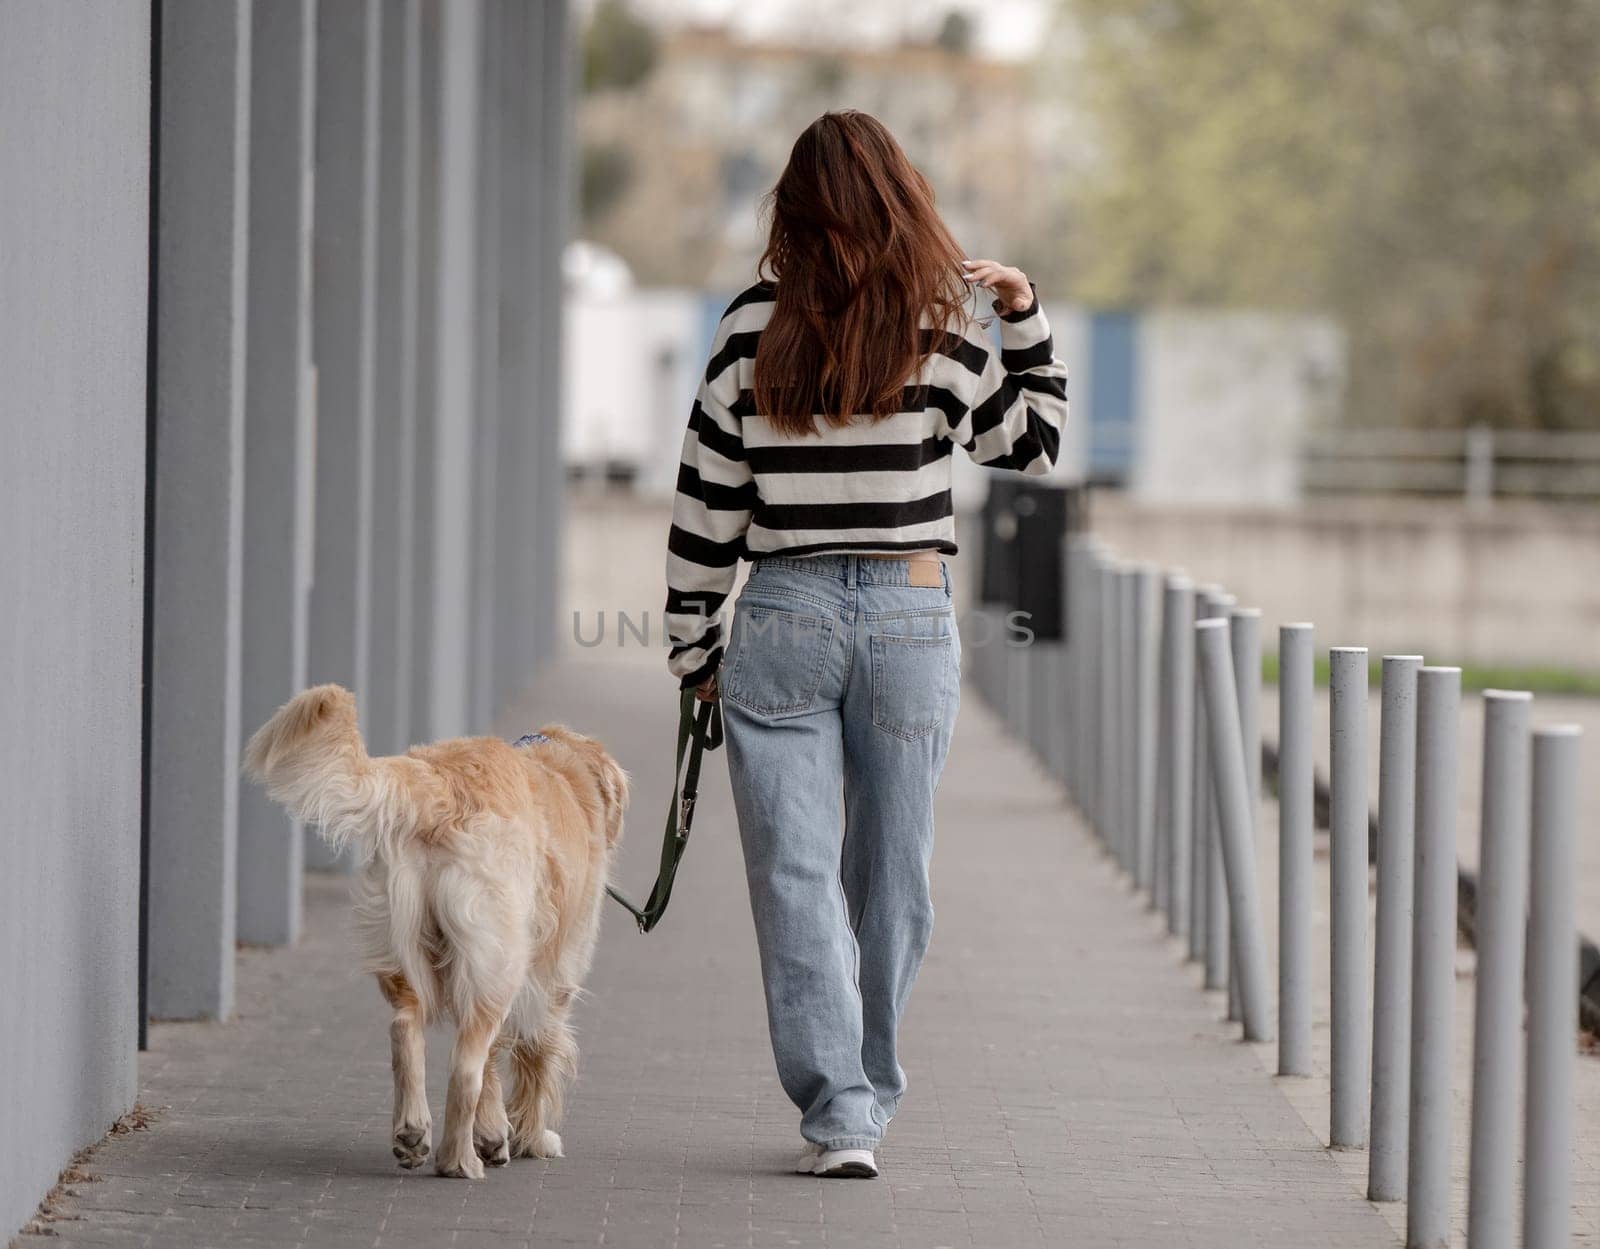 Teen Girl With Golden Retriever Sits In City During Spring, Viewed From Behind